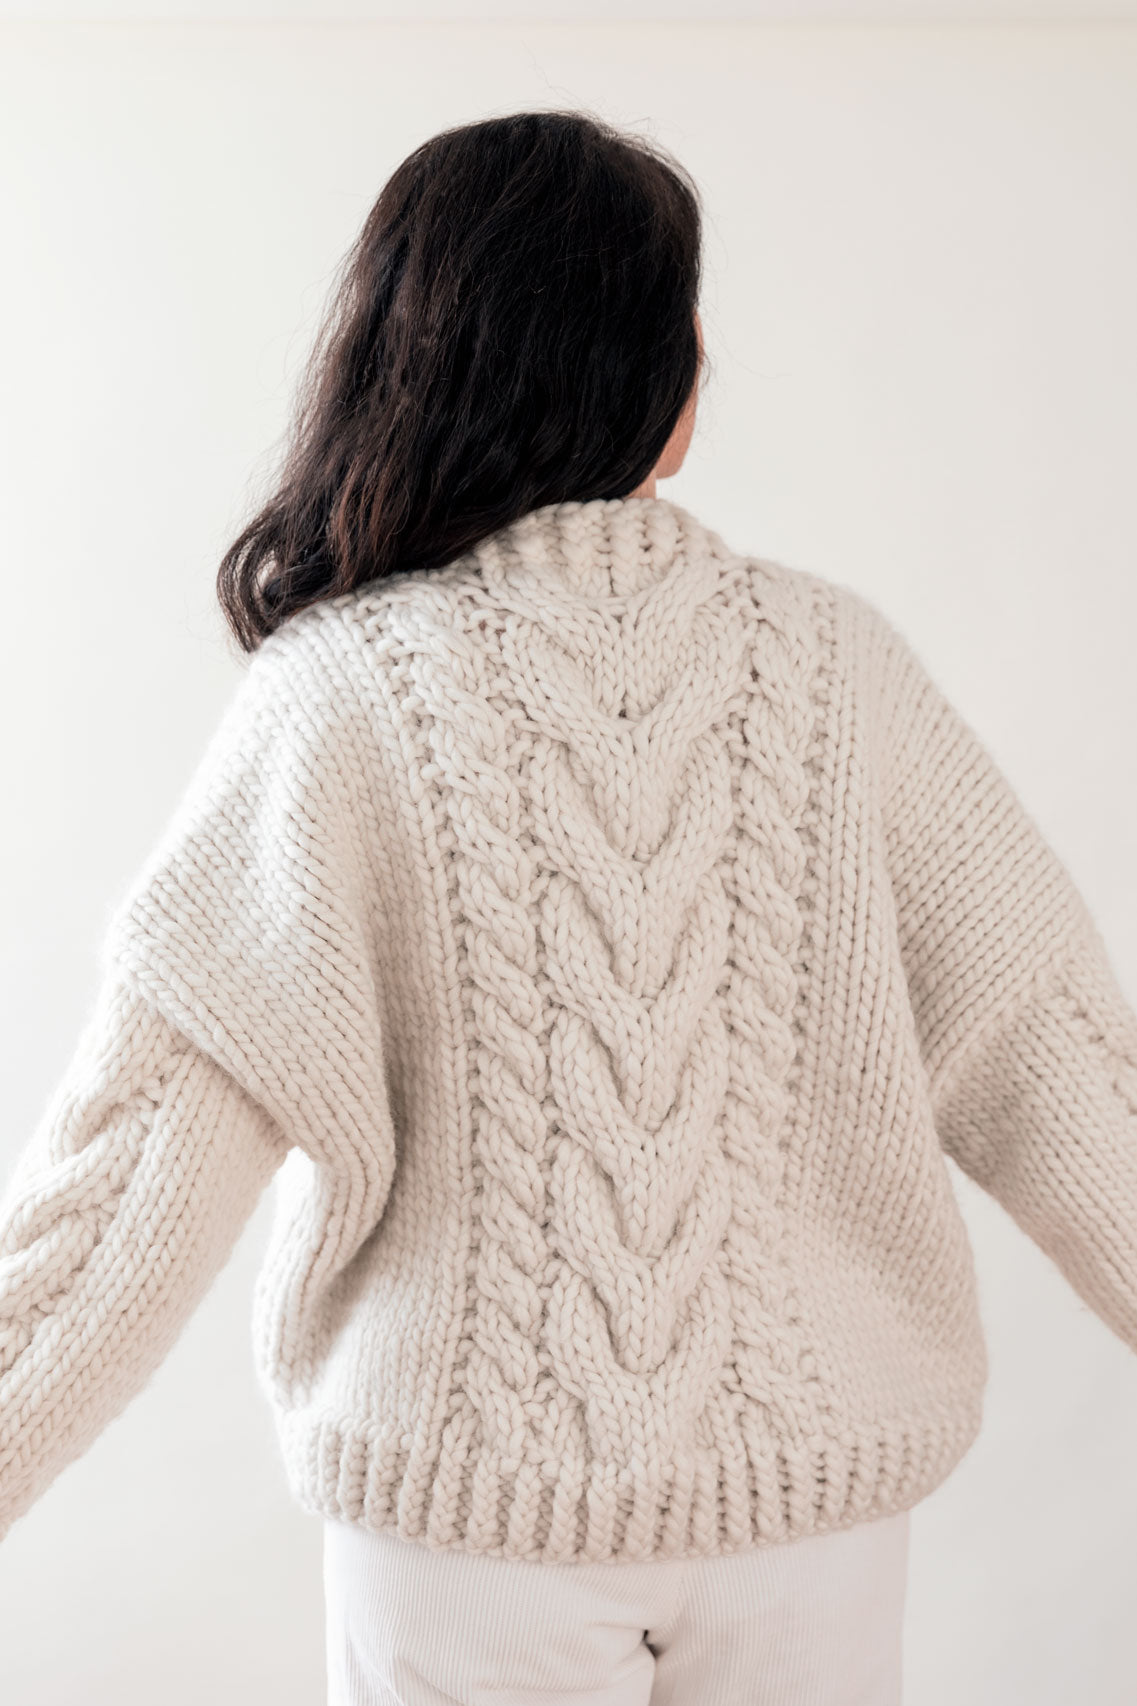 TODAYFUL Cable HandKnit Cardigan36新品未使用